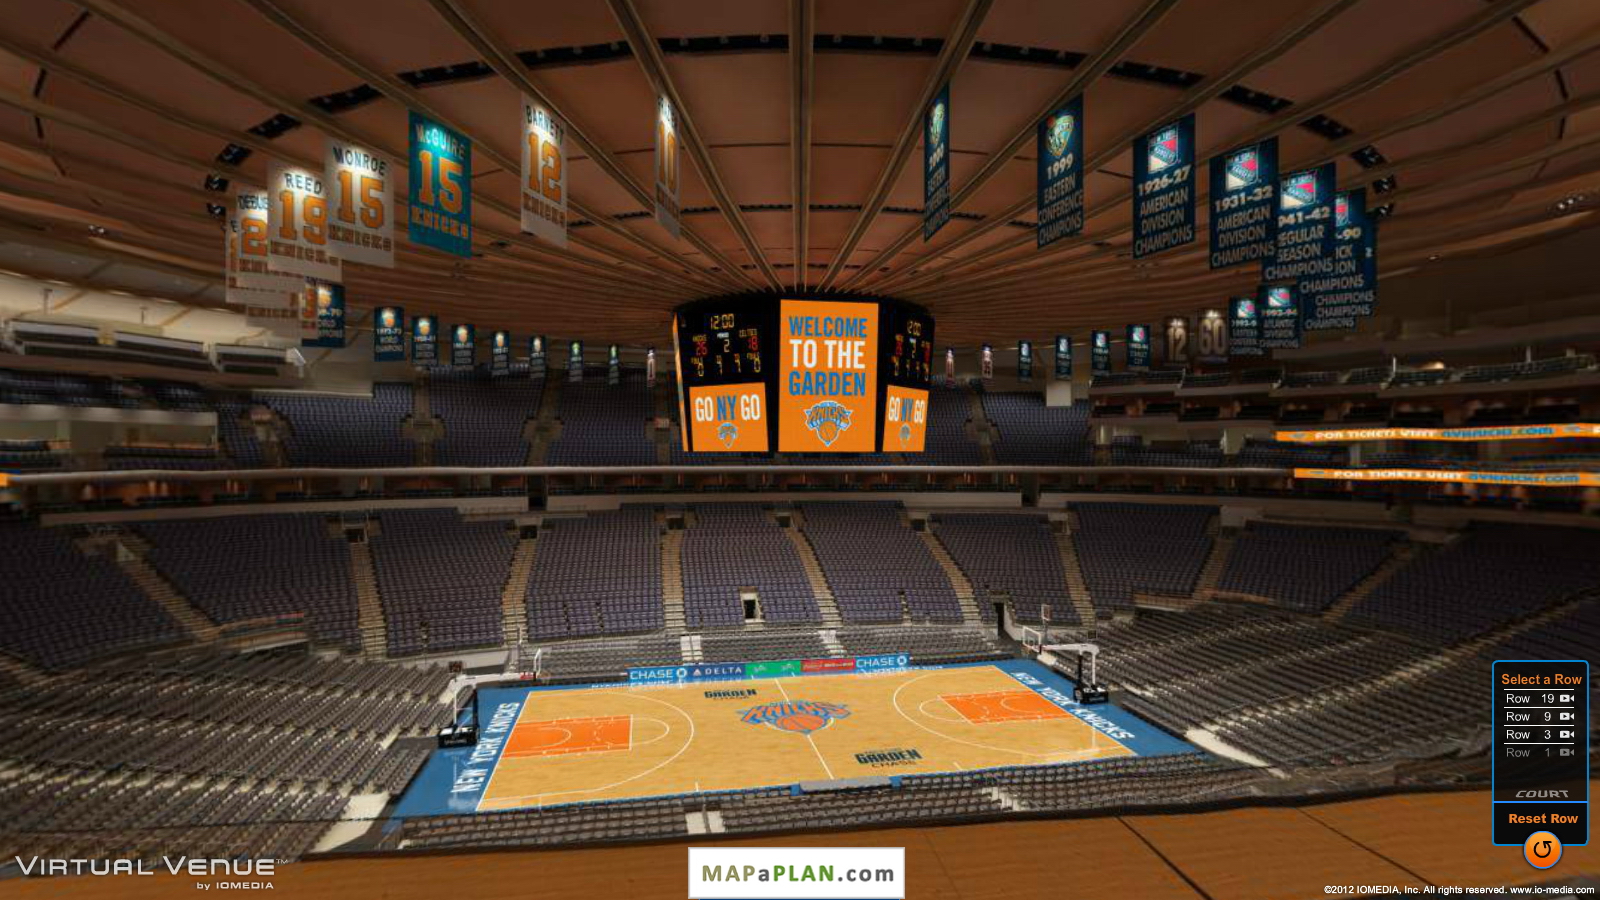 Madison Square Garden seating chart View from section 223